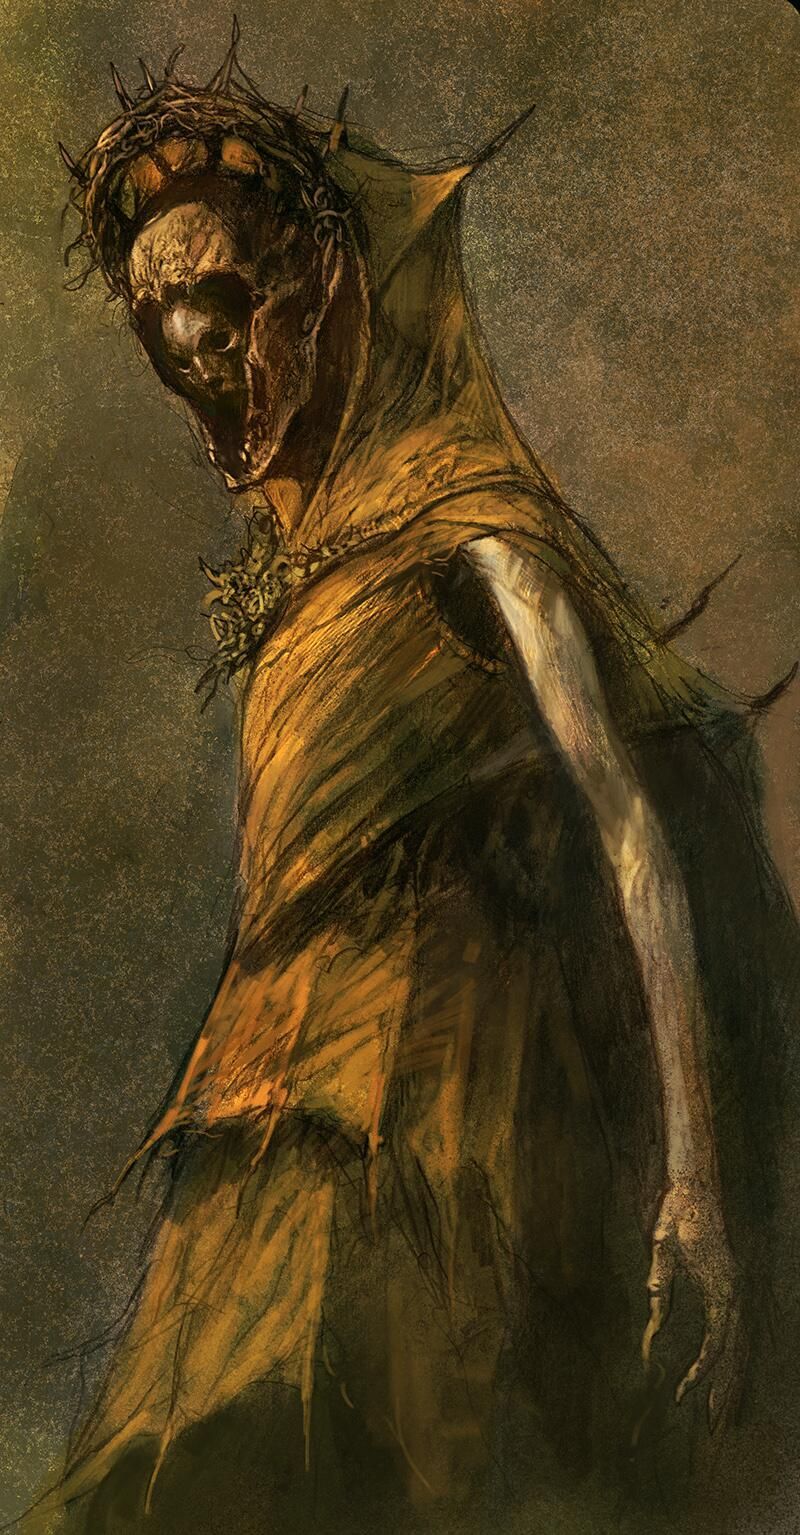 The King in Yellow by Dave Kendall